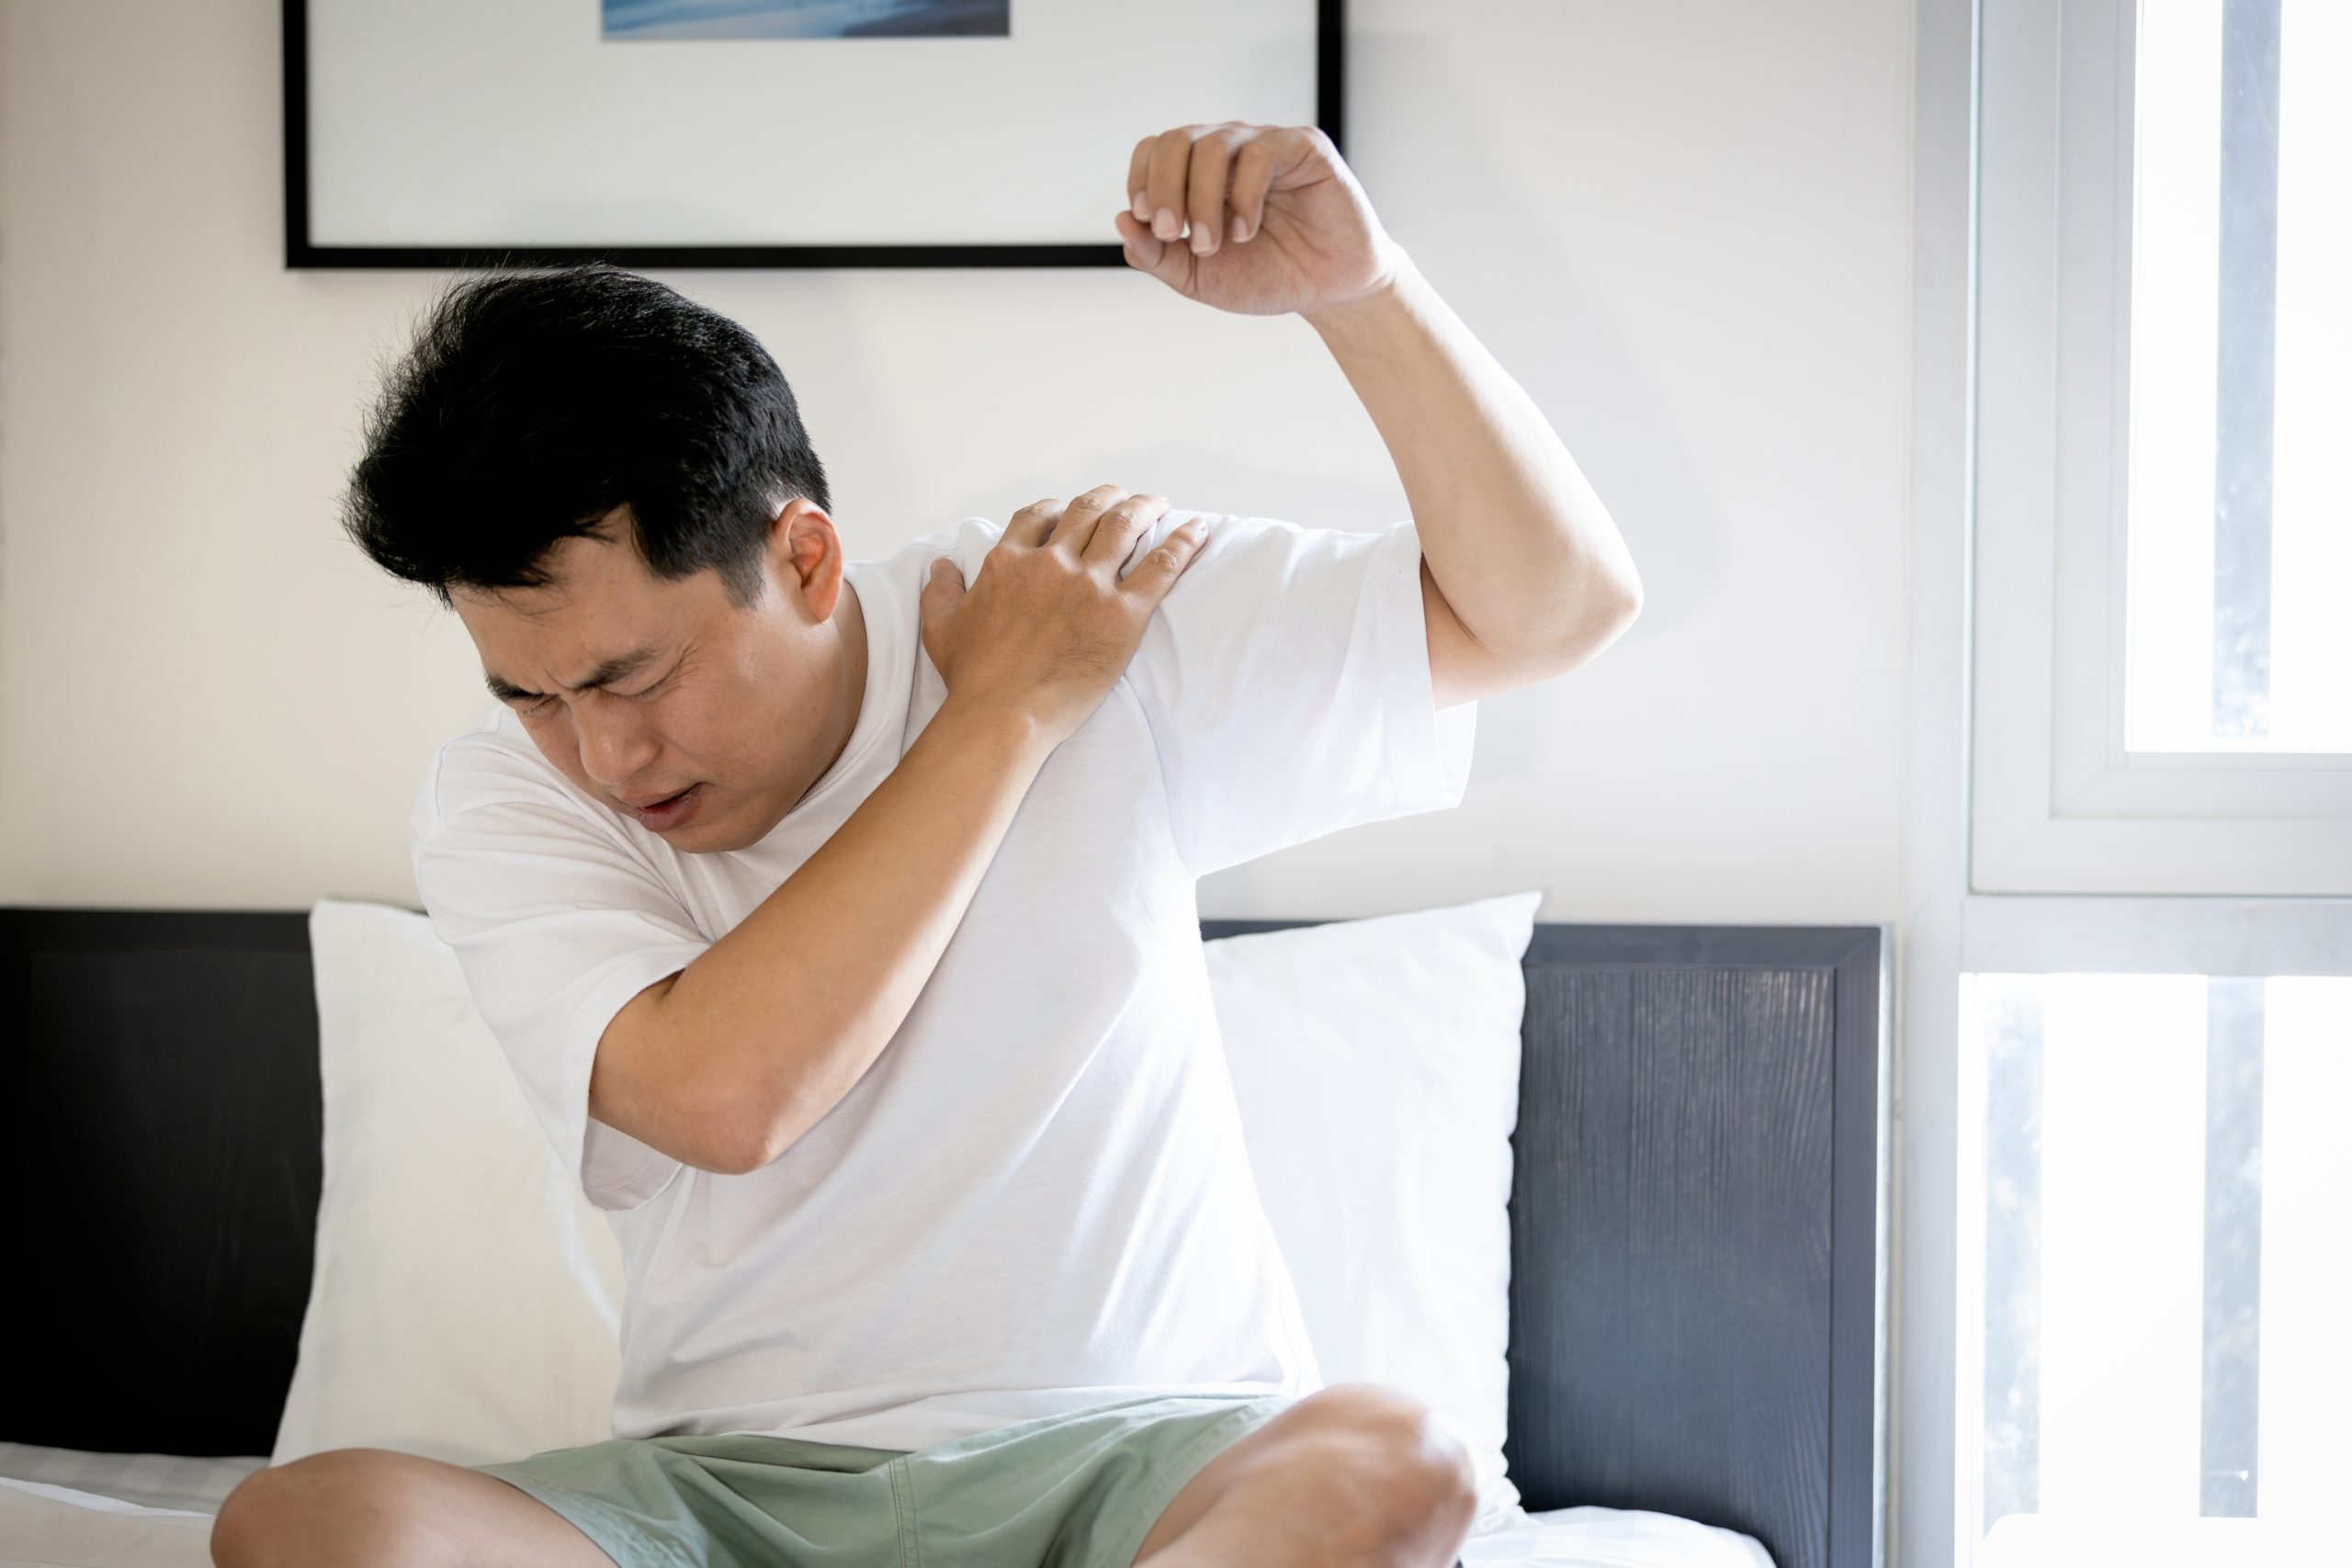 Chiropractic Care For Shoulder Pain Near Bothell-Mill Creek, WA